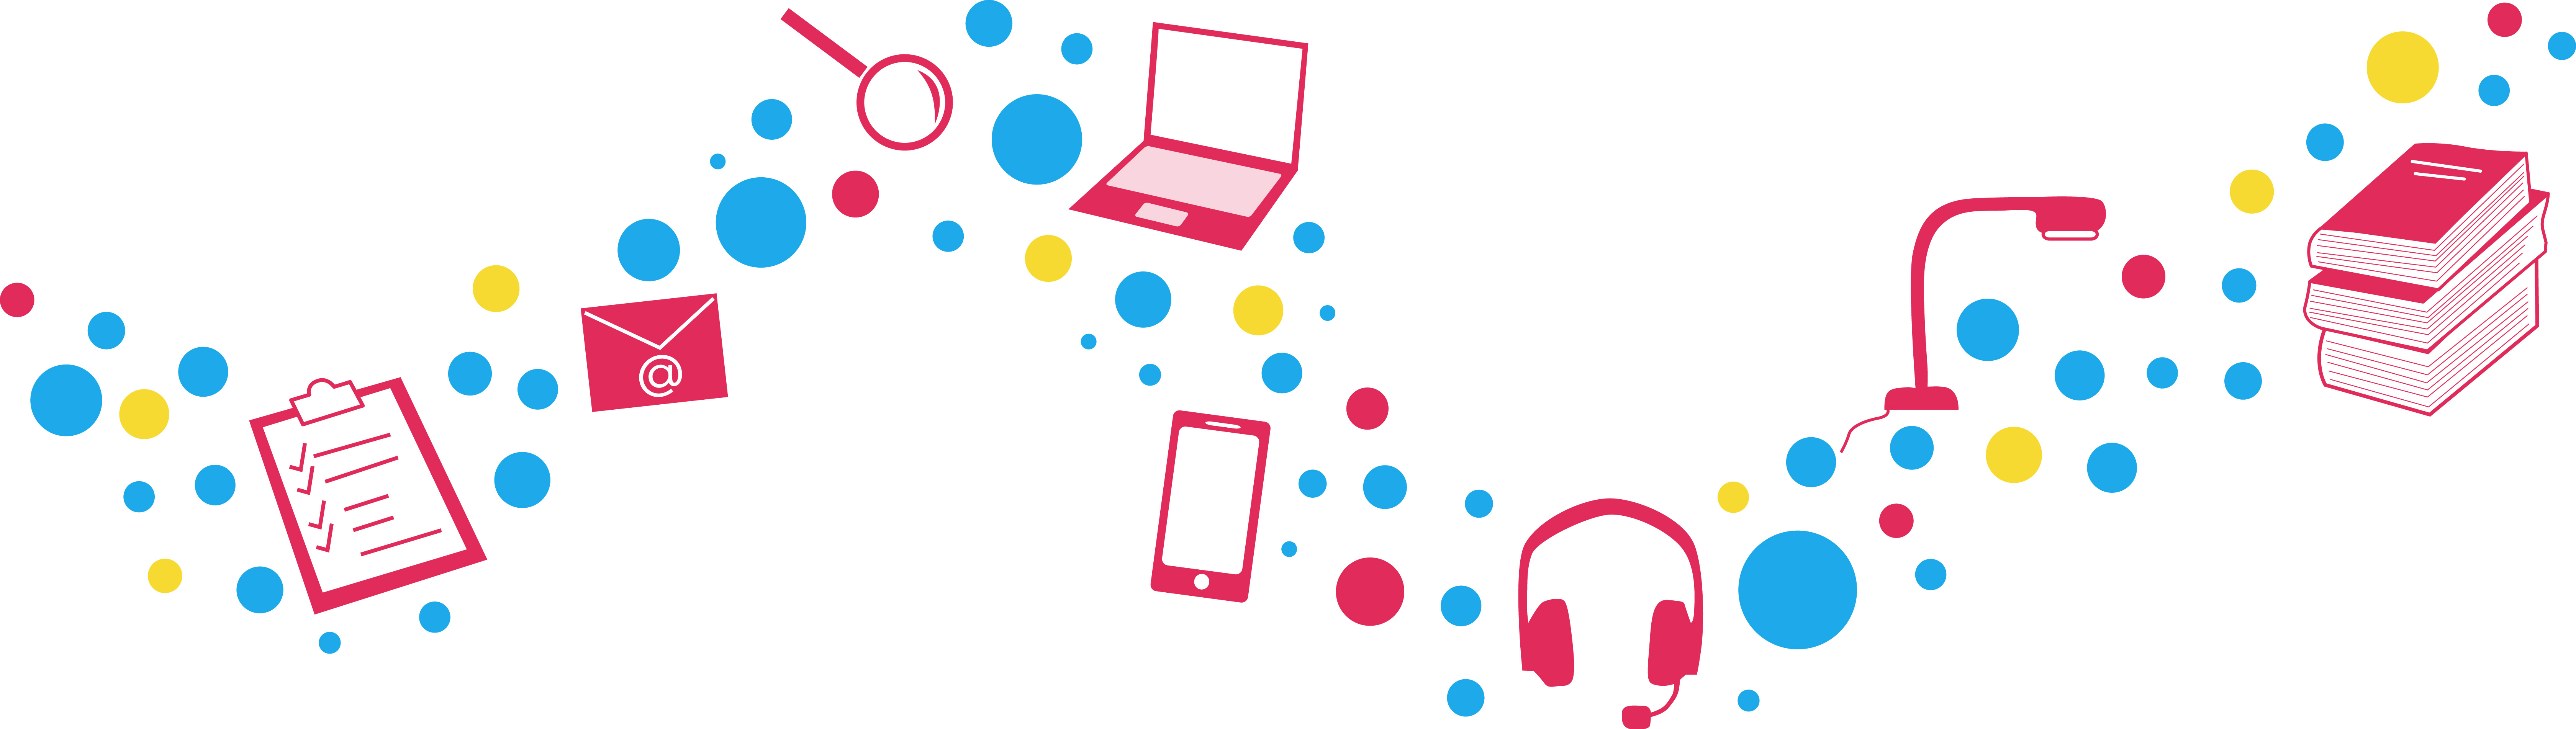 Different icons in a wavy line with bubbles in pink, blue and yellow